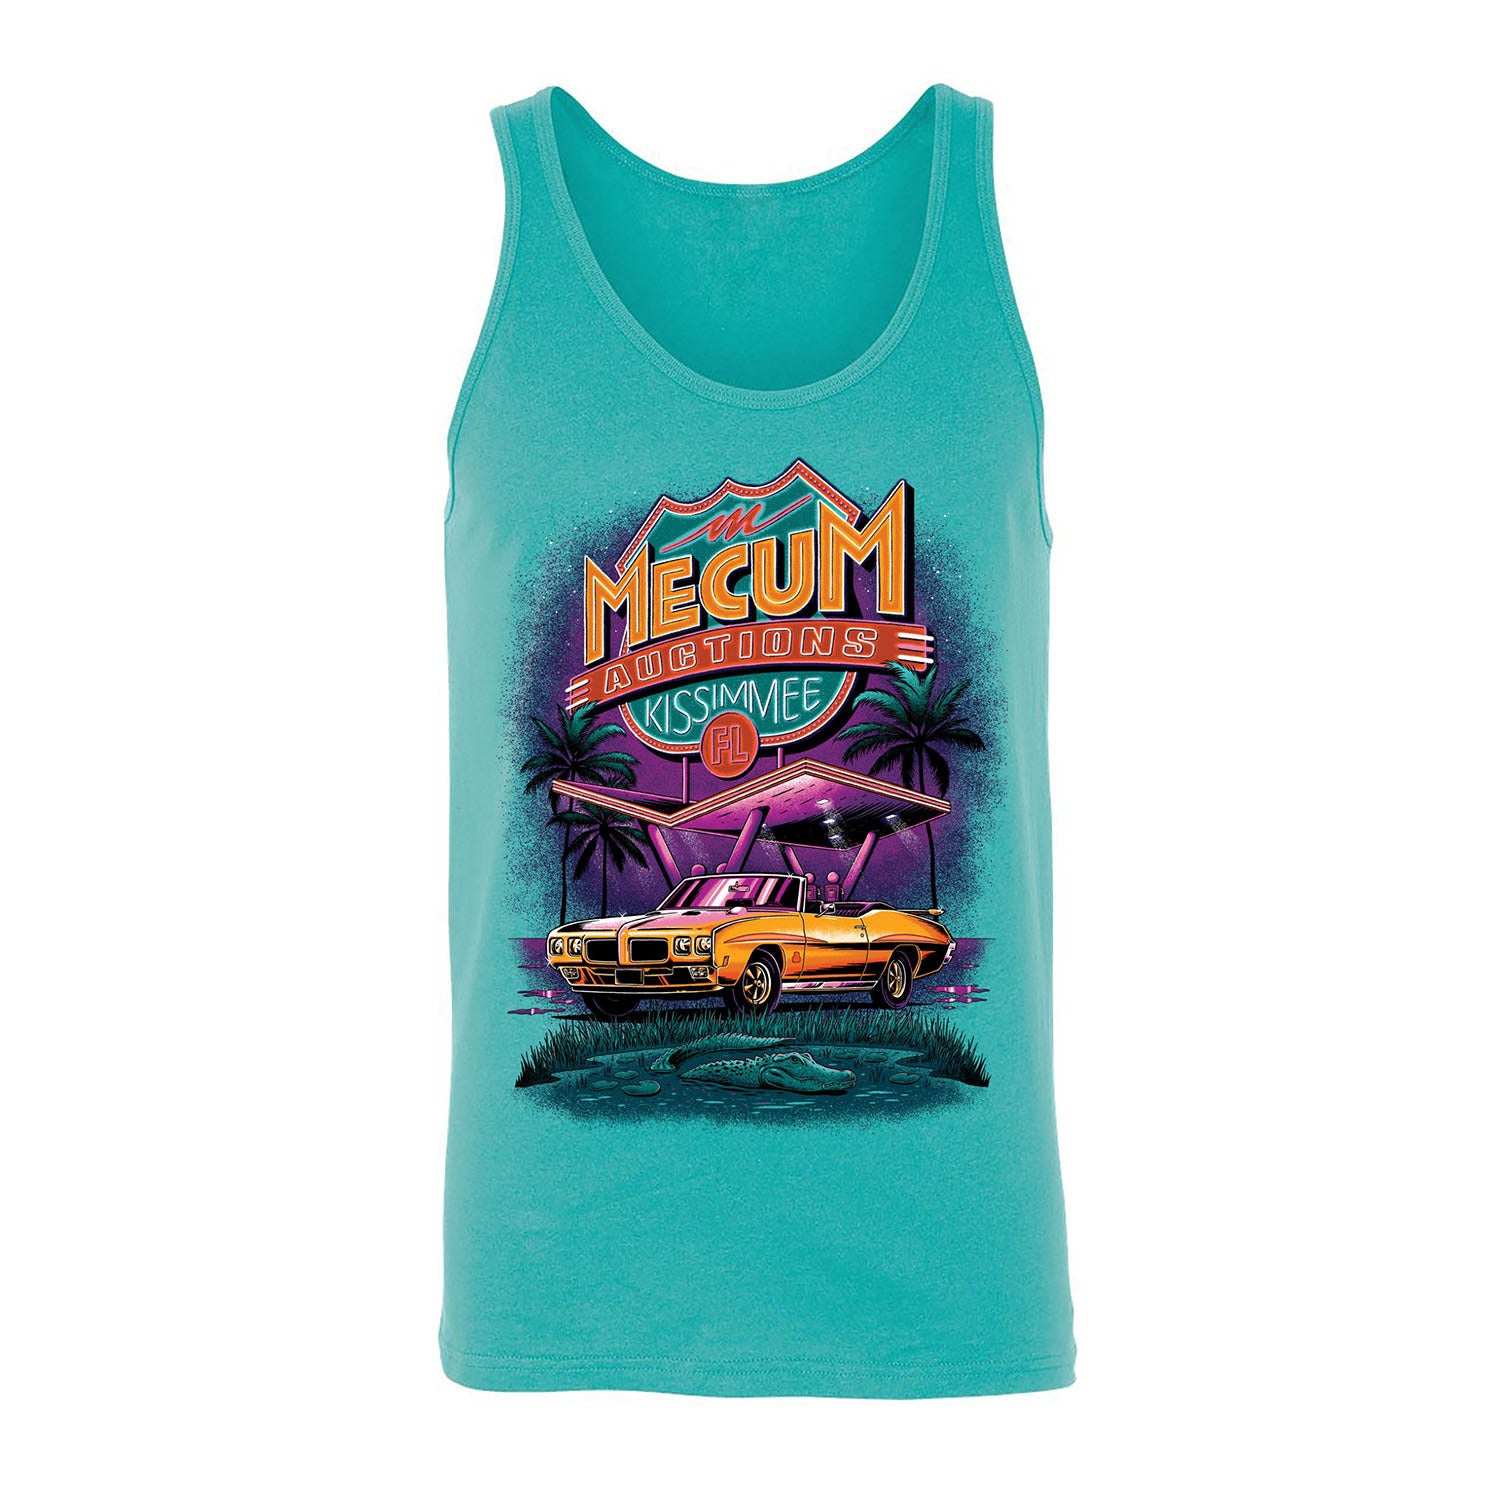 Mecum Auctions Kissimmee Teal Vintage Sign Tank Top - Front View